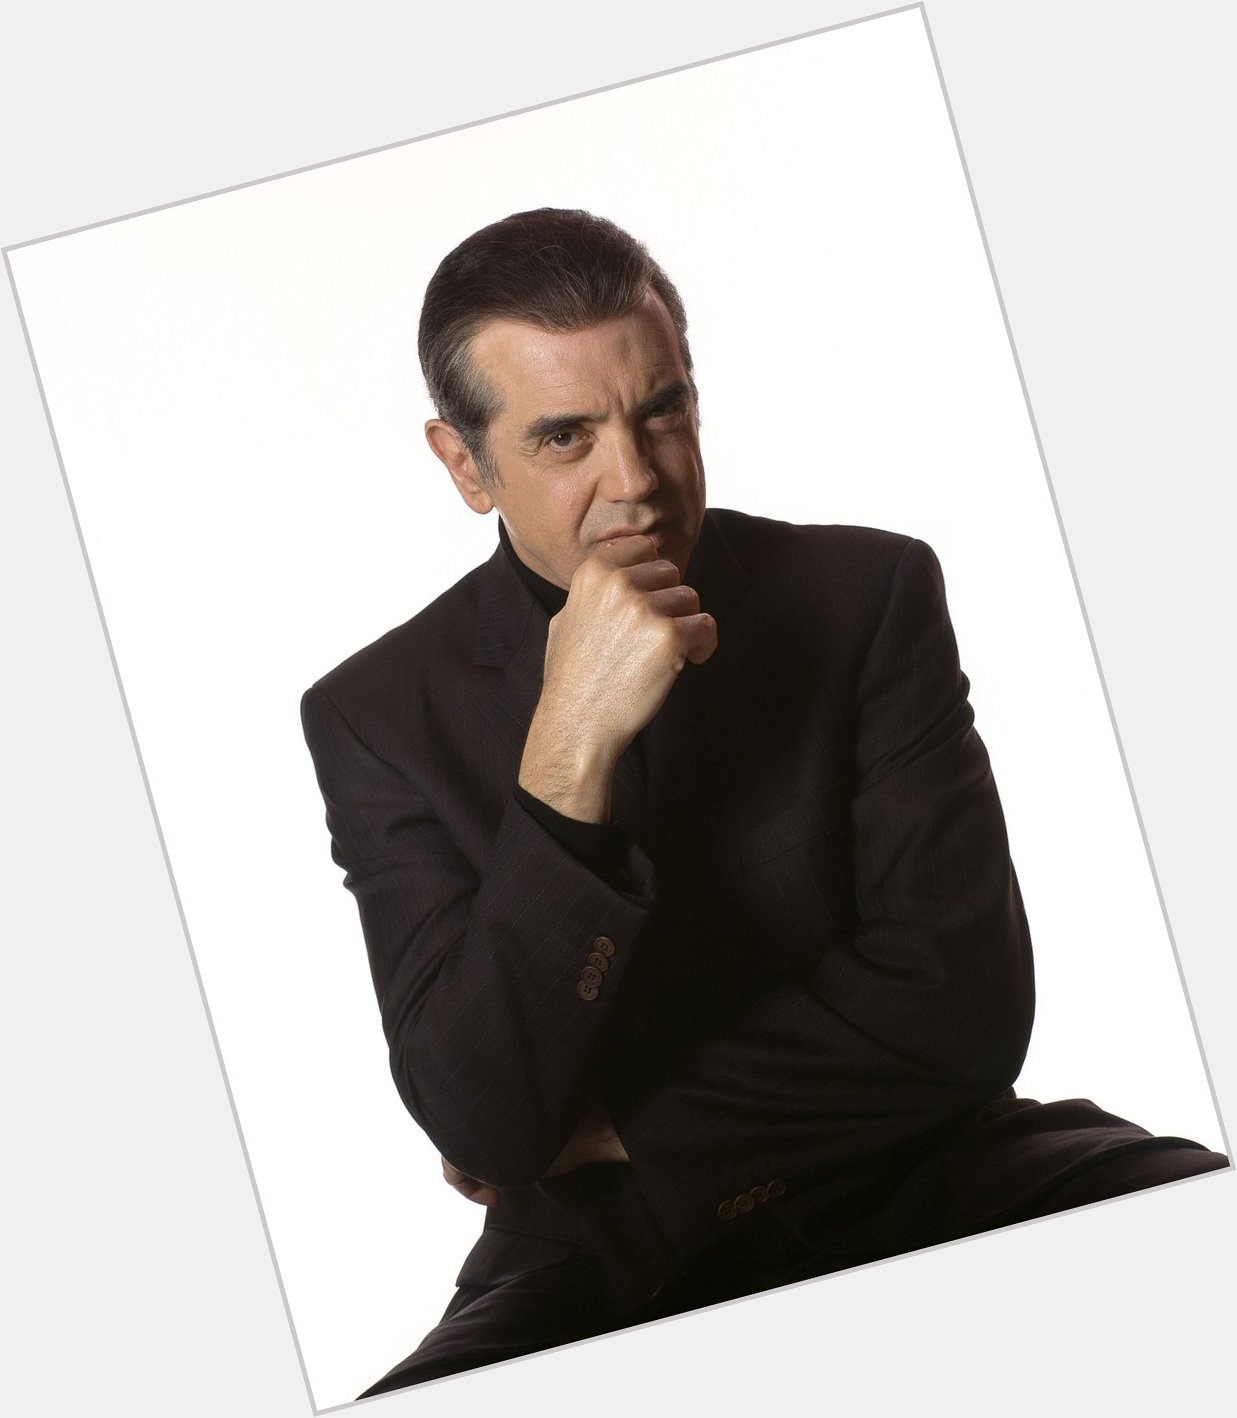 Happy Birthday to Chazz Palminteri! 

What is the first role that comes to mind when you see his picture? 